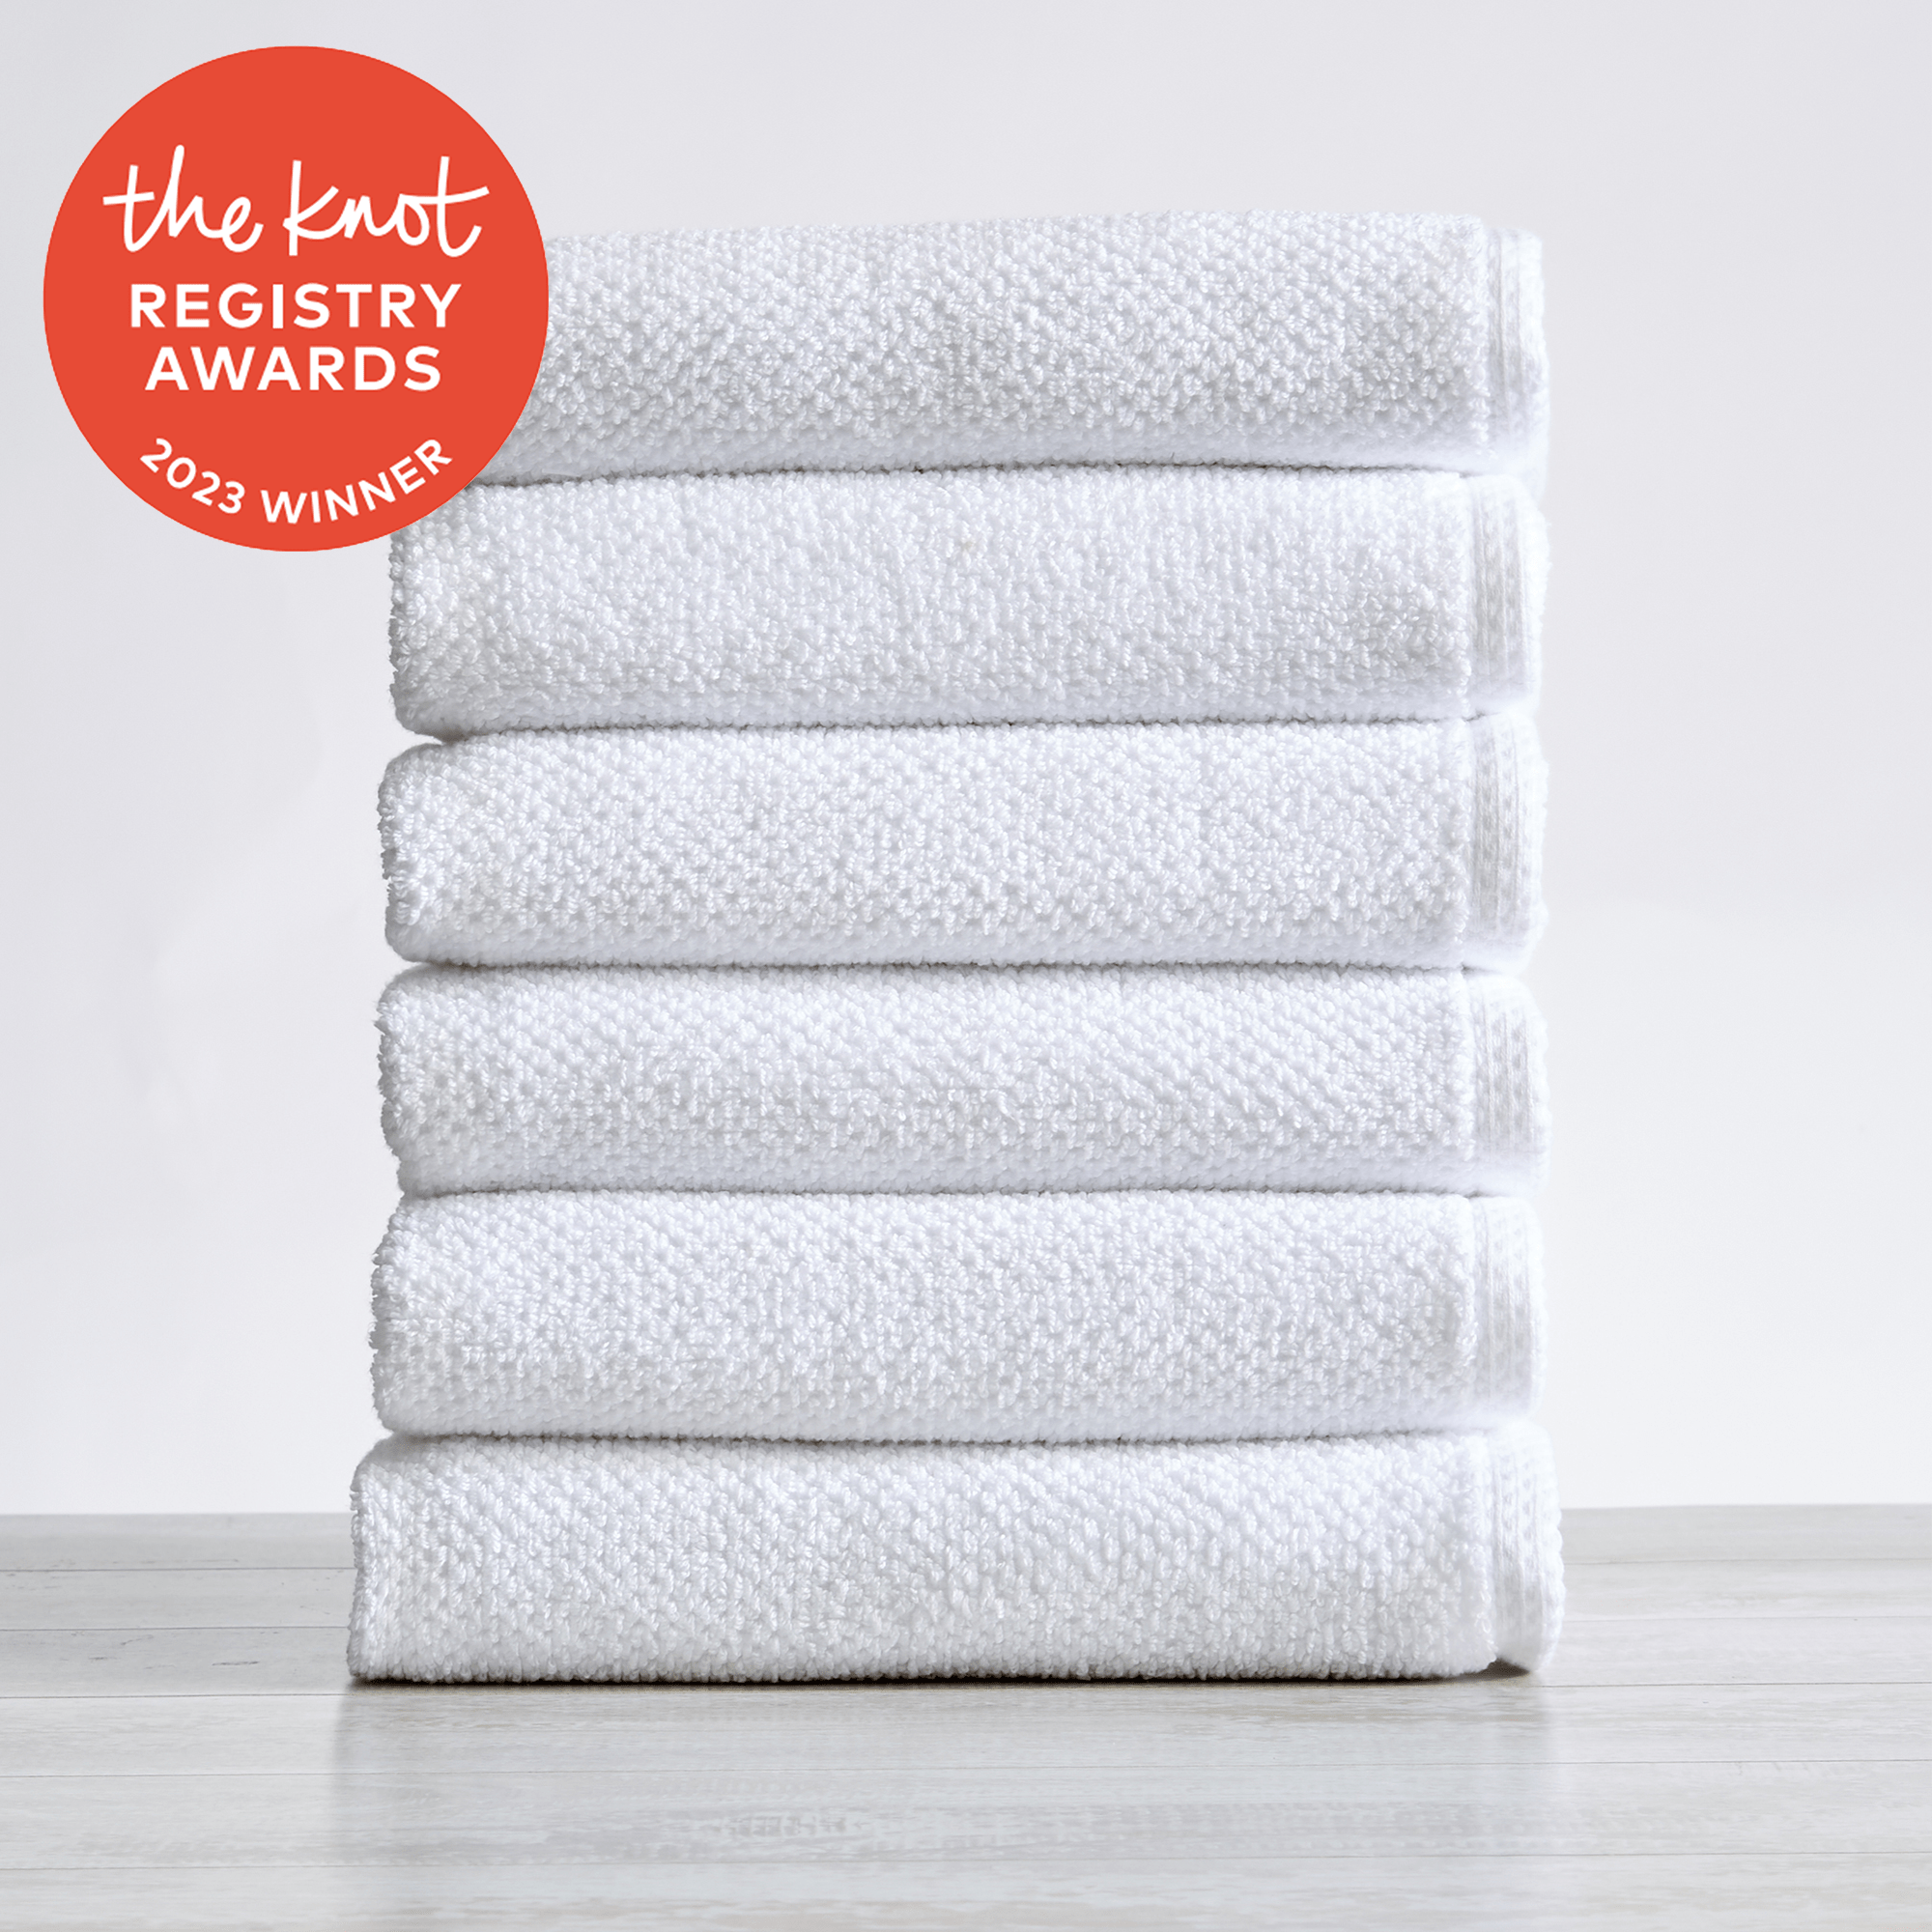 Basics Odor Resistant Textured Hand Towel, 16 x 26 Inches - 6-Pack,  Lavender